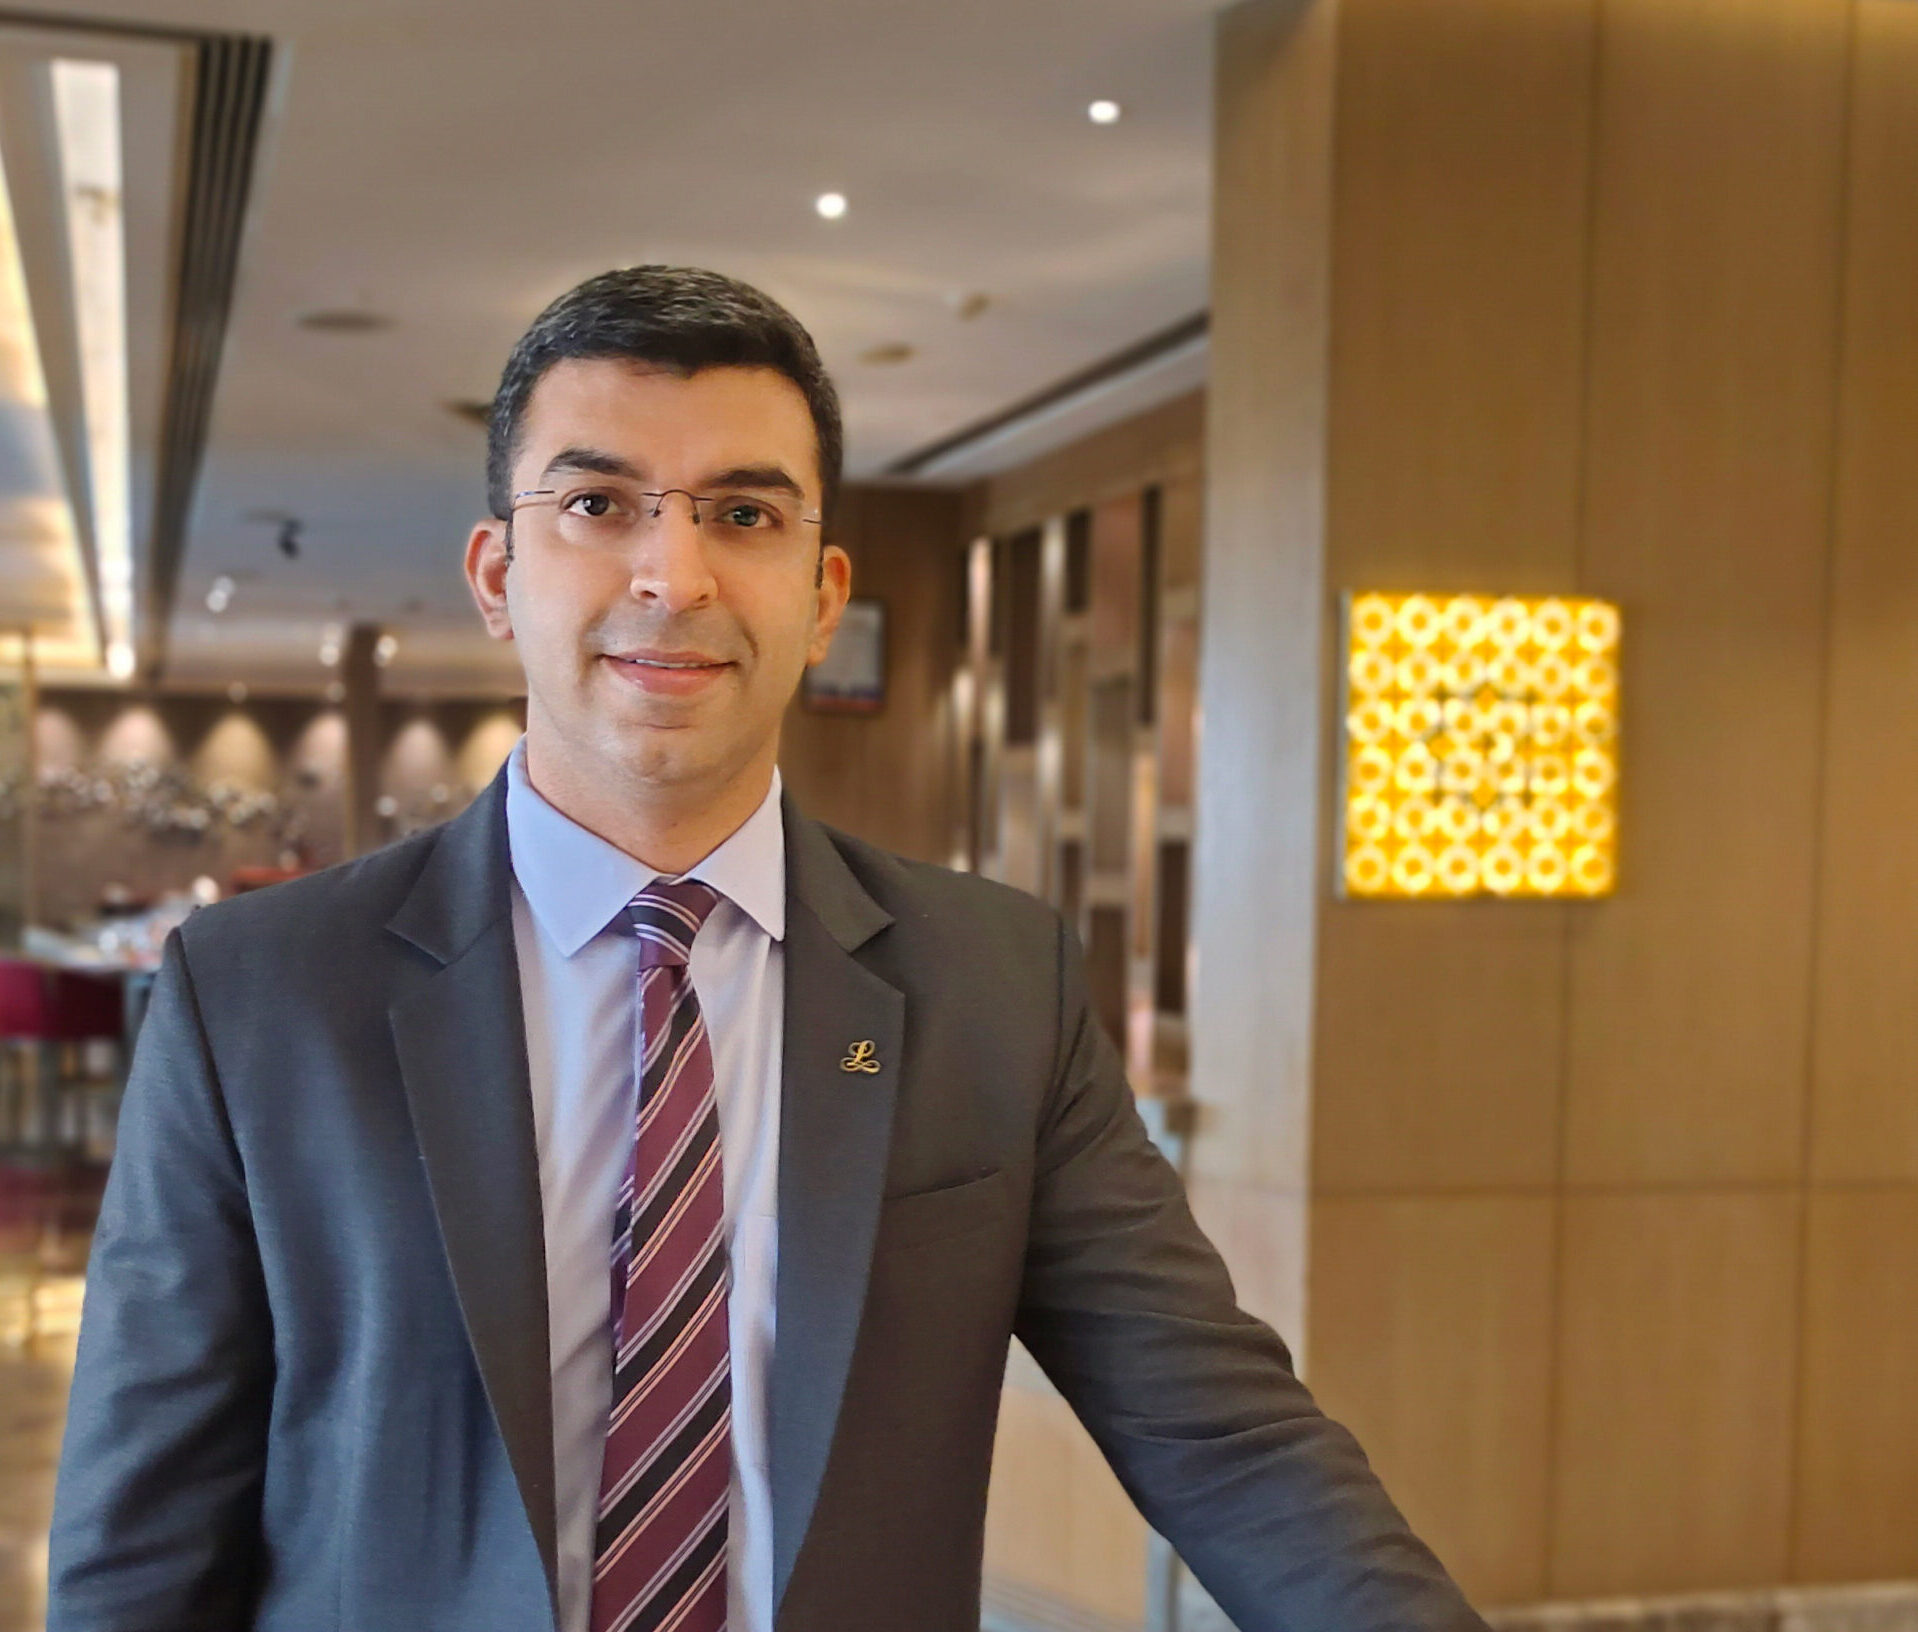 The Leela Ambience Convention Hotel, Delhi appoints Aagman Baury as The General Manager